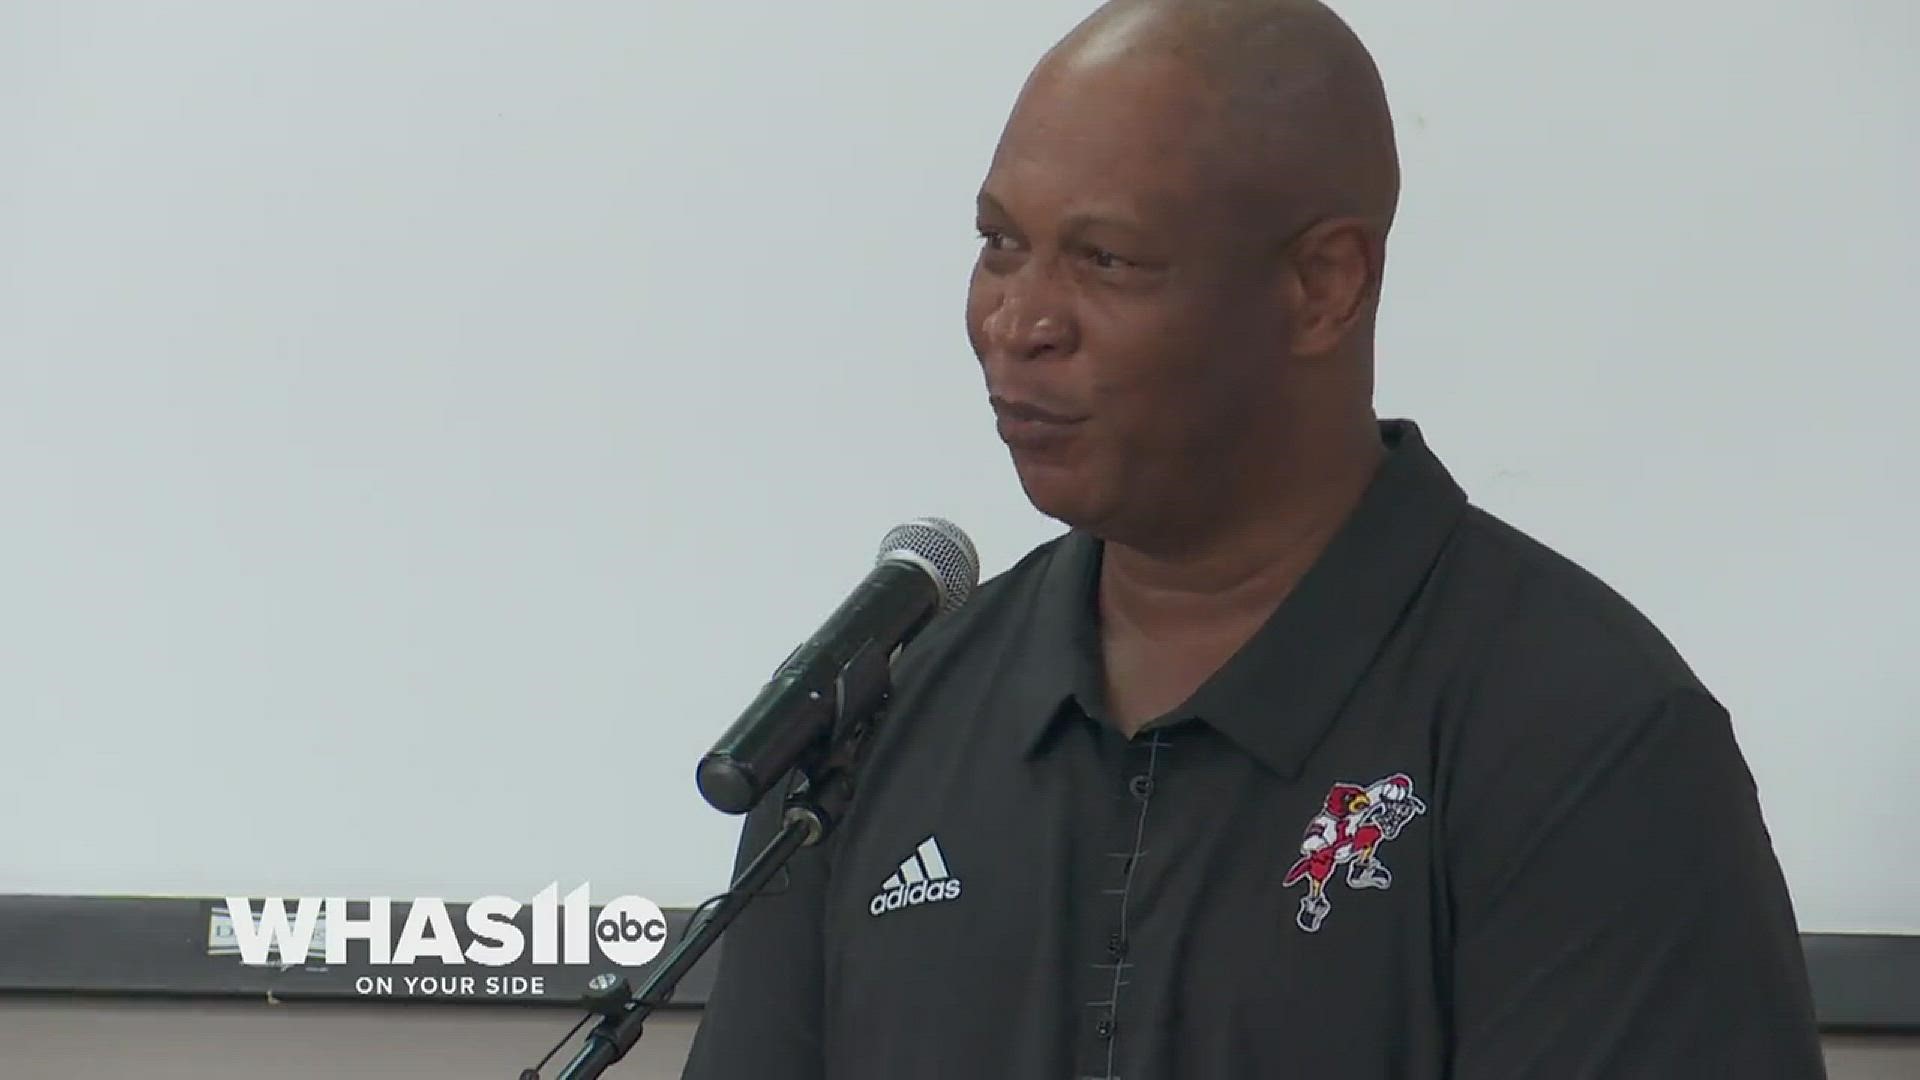 Cardinal basketball head coach Kenny Payne said he is relieved to be able to move on.